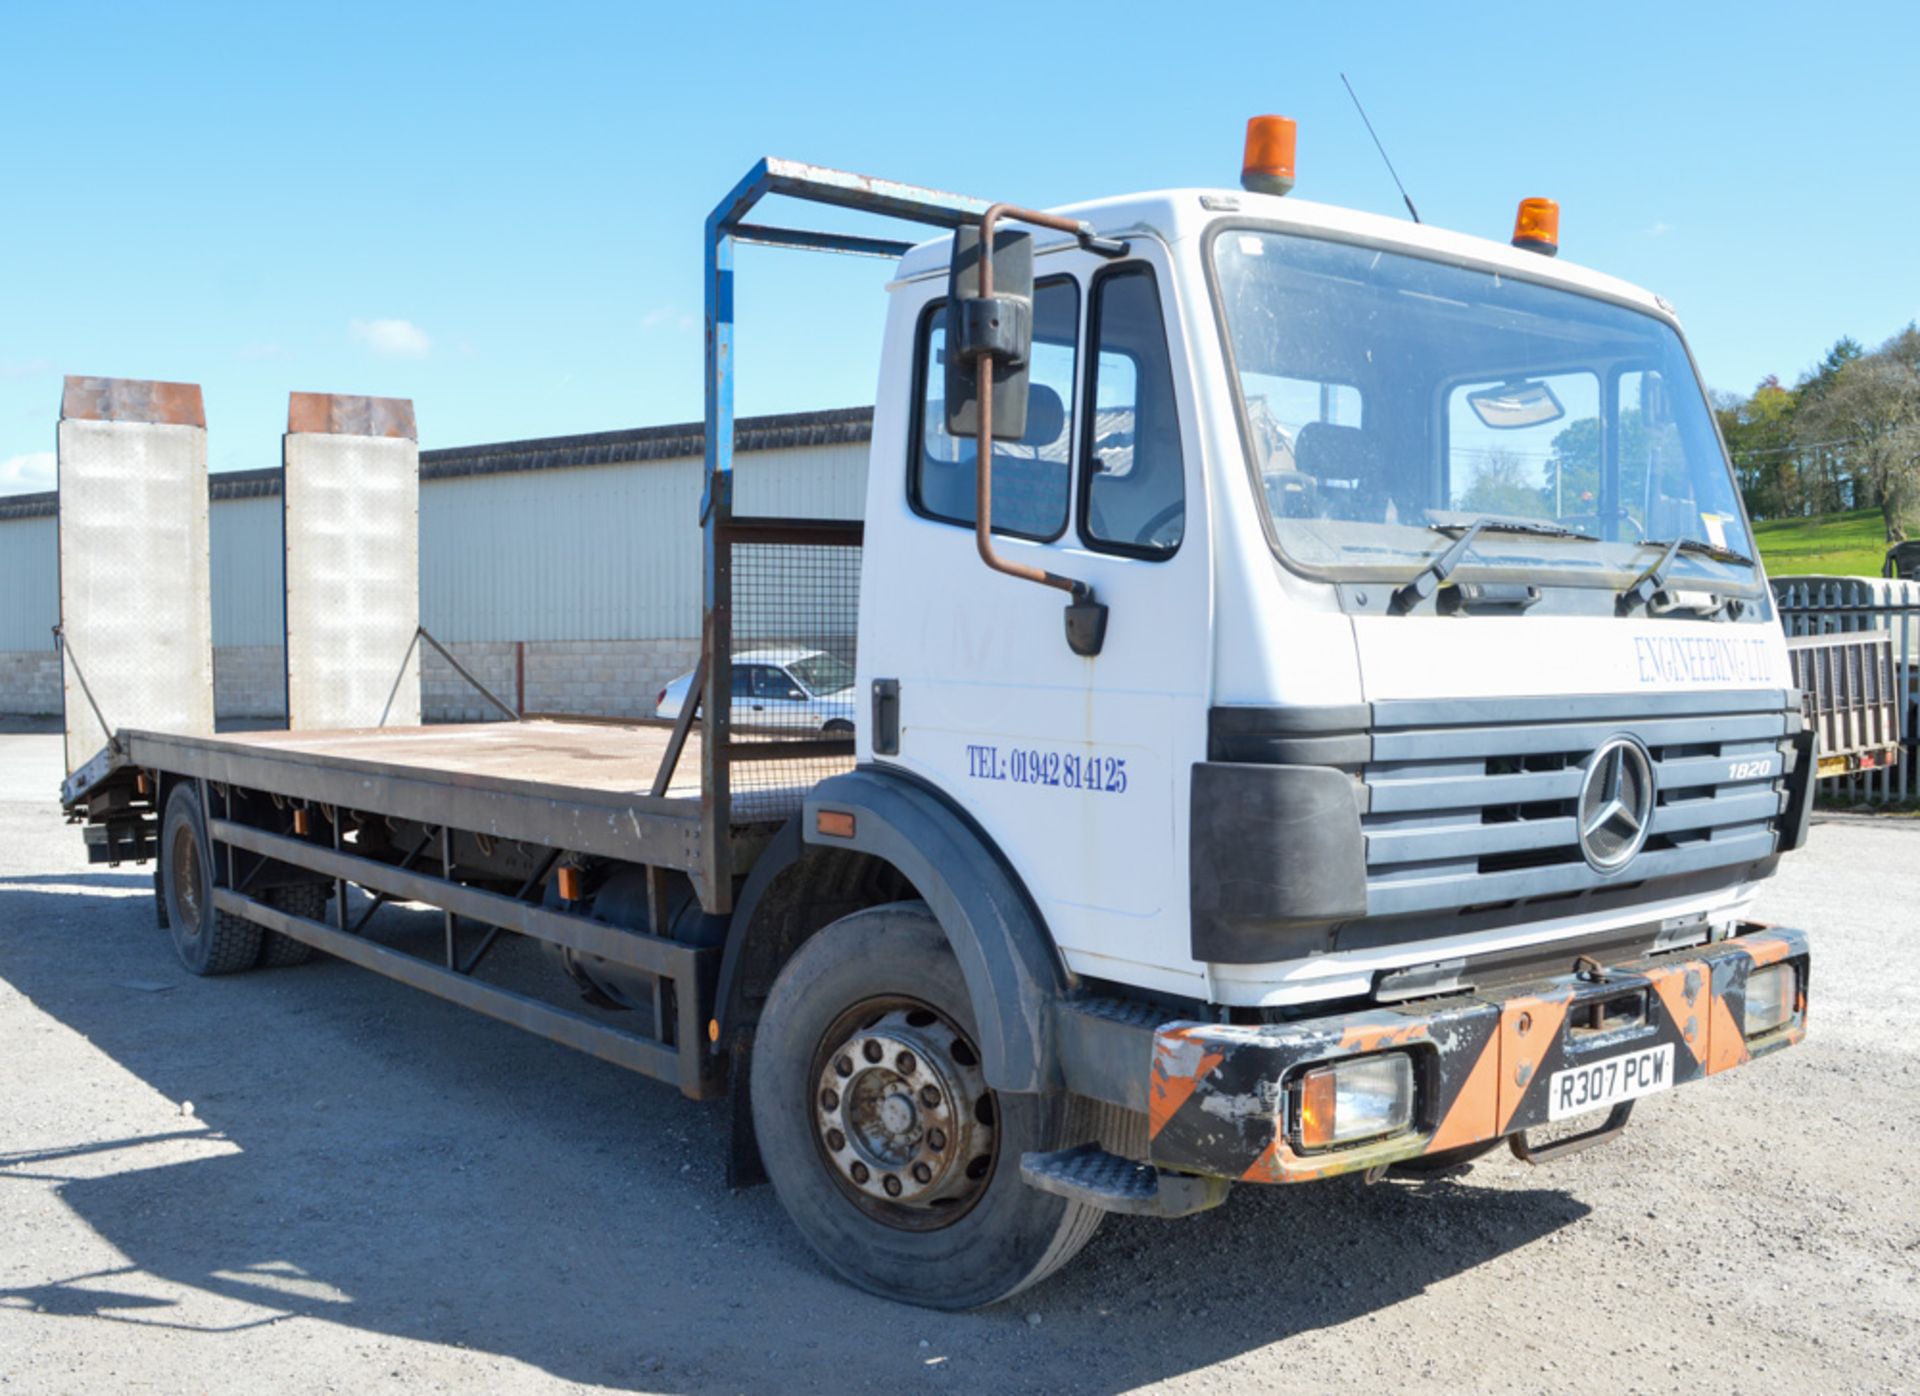 Mercedes Benz 1820 18 tonne beaver tail plant lorry Registration Number: R307 PCW Date of